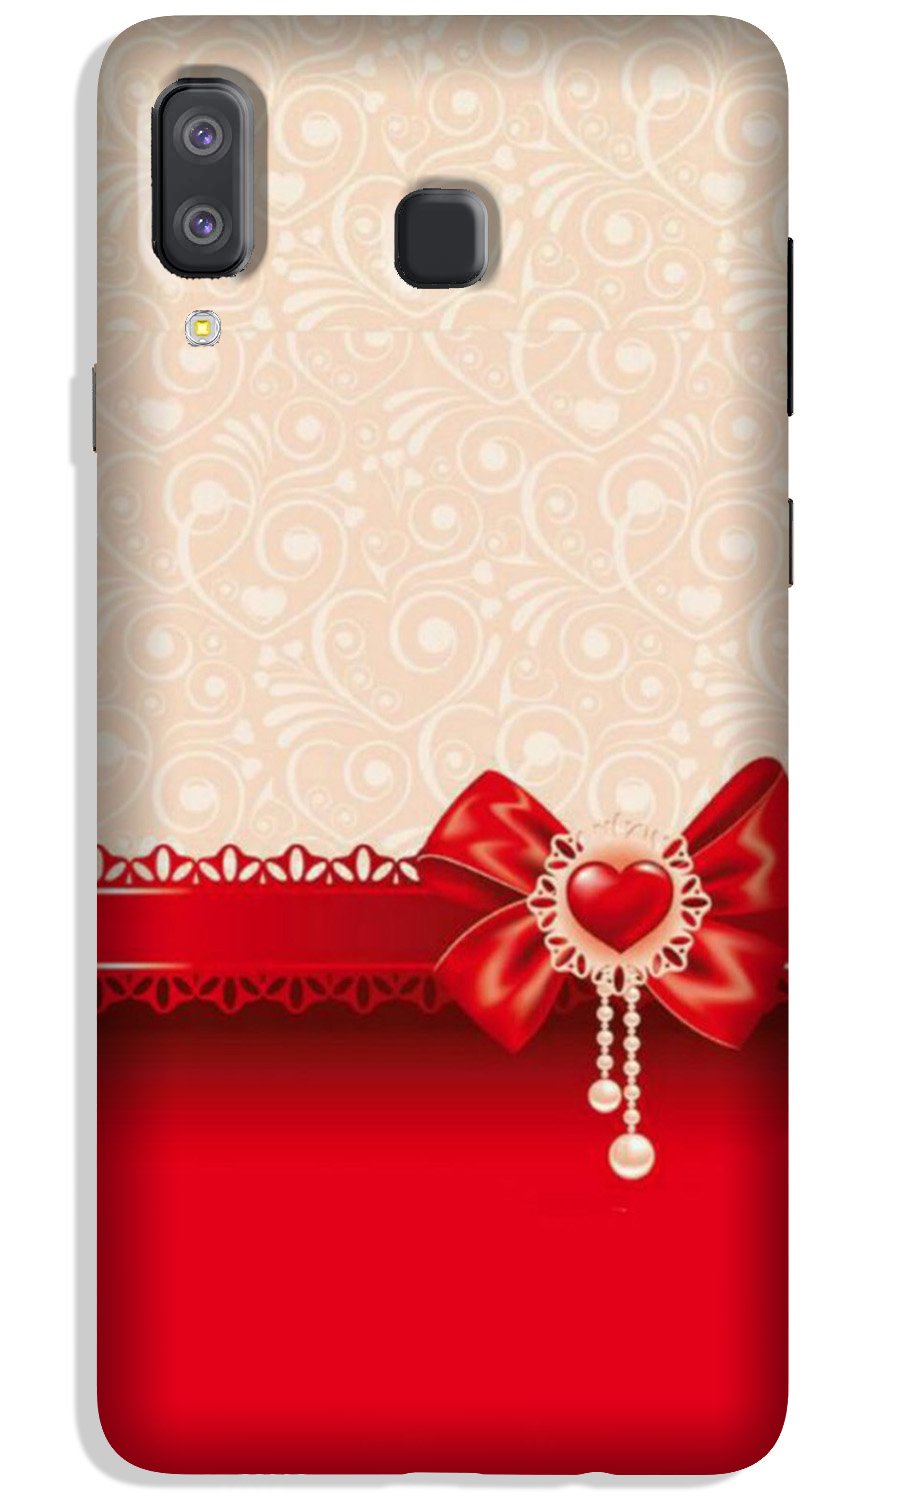 Gift Wrap3 Case for Galaxy A8 Star